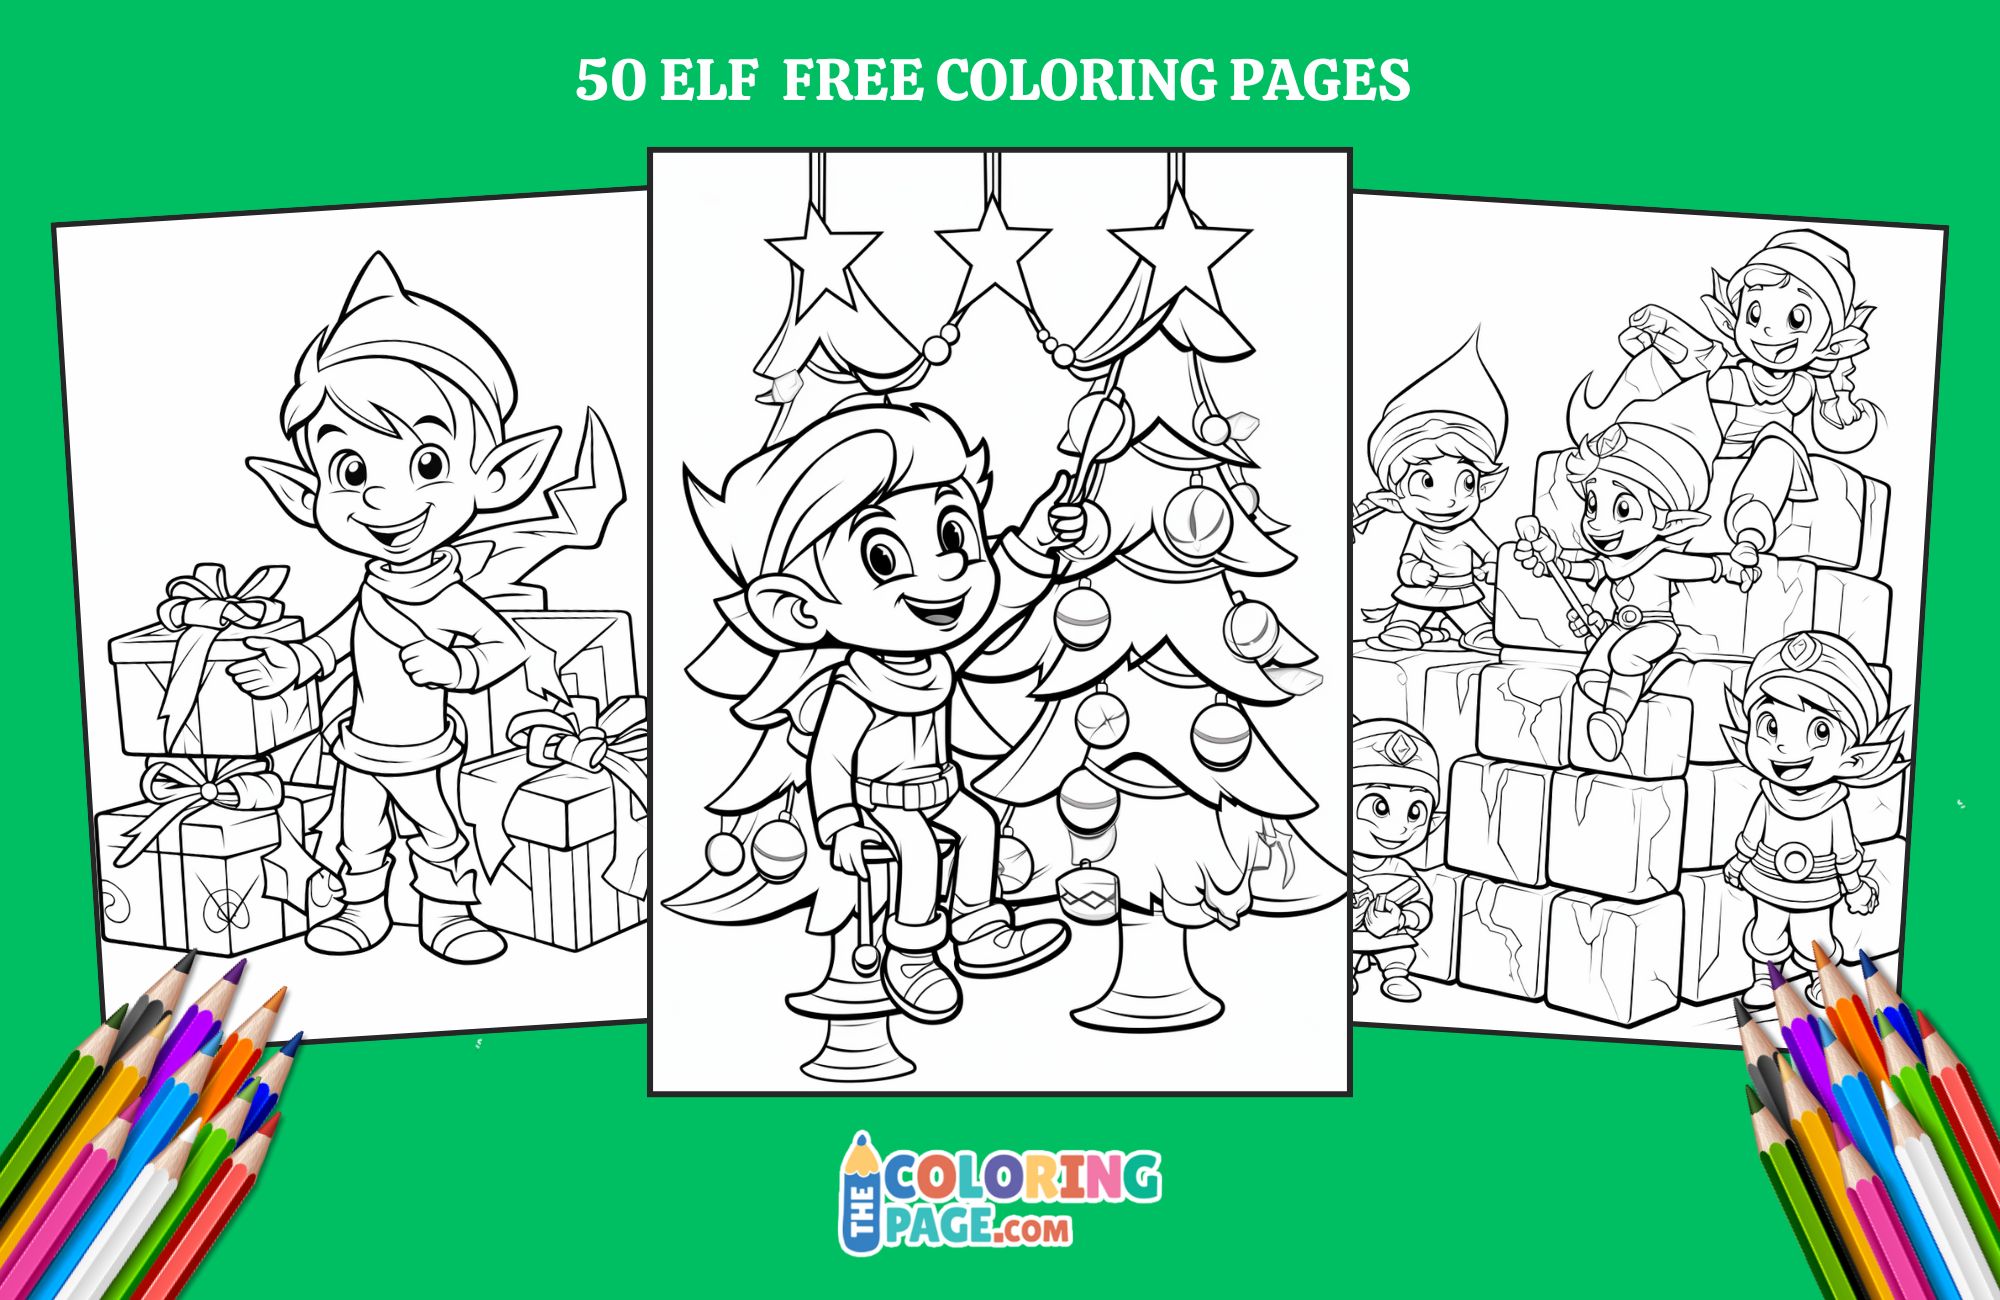 50 Free Elf Coloring Pages for kids